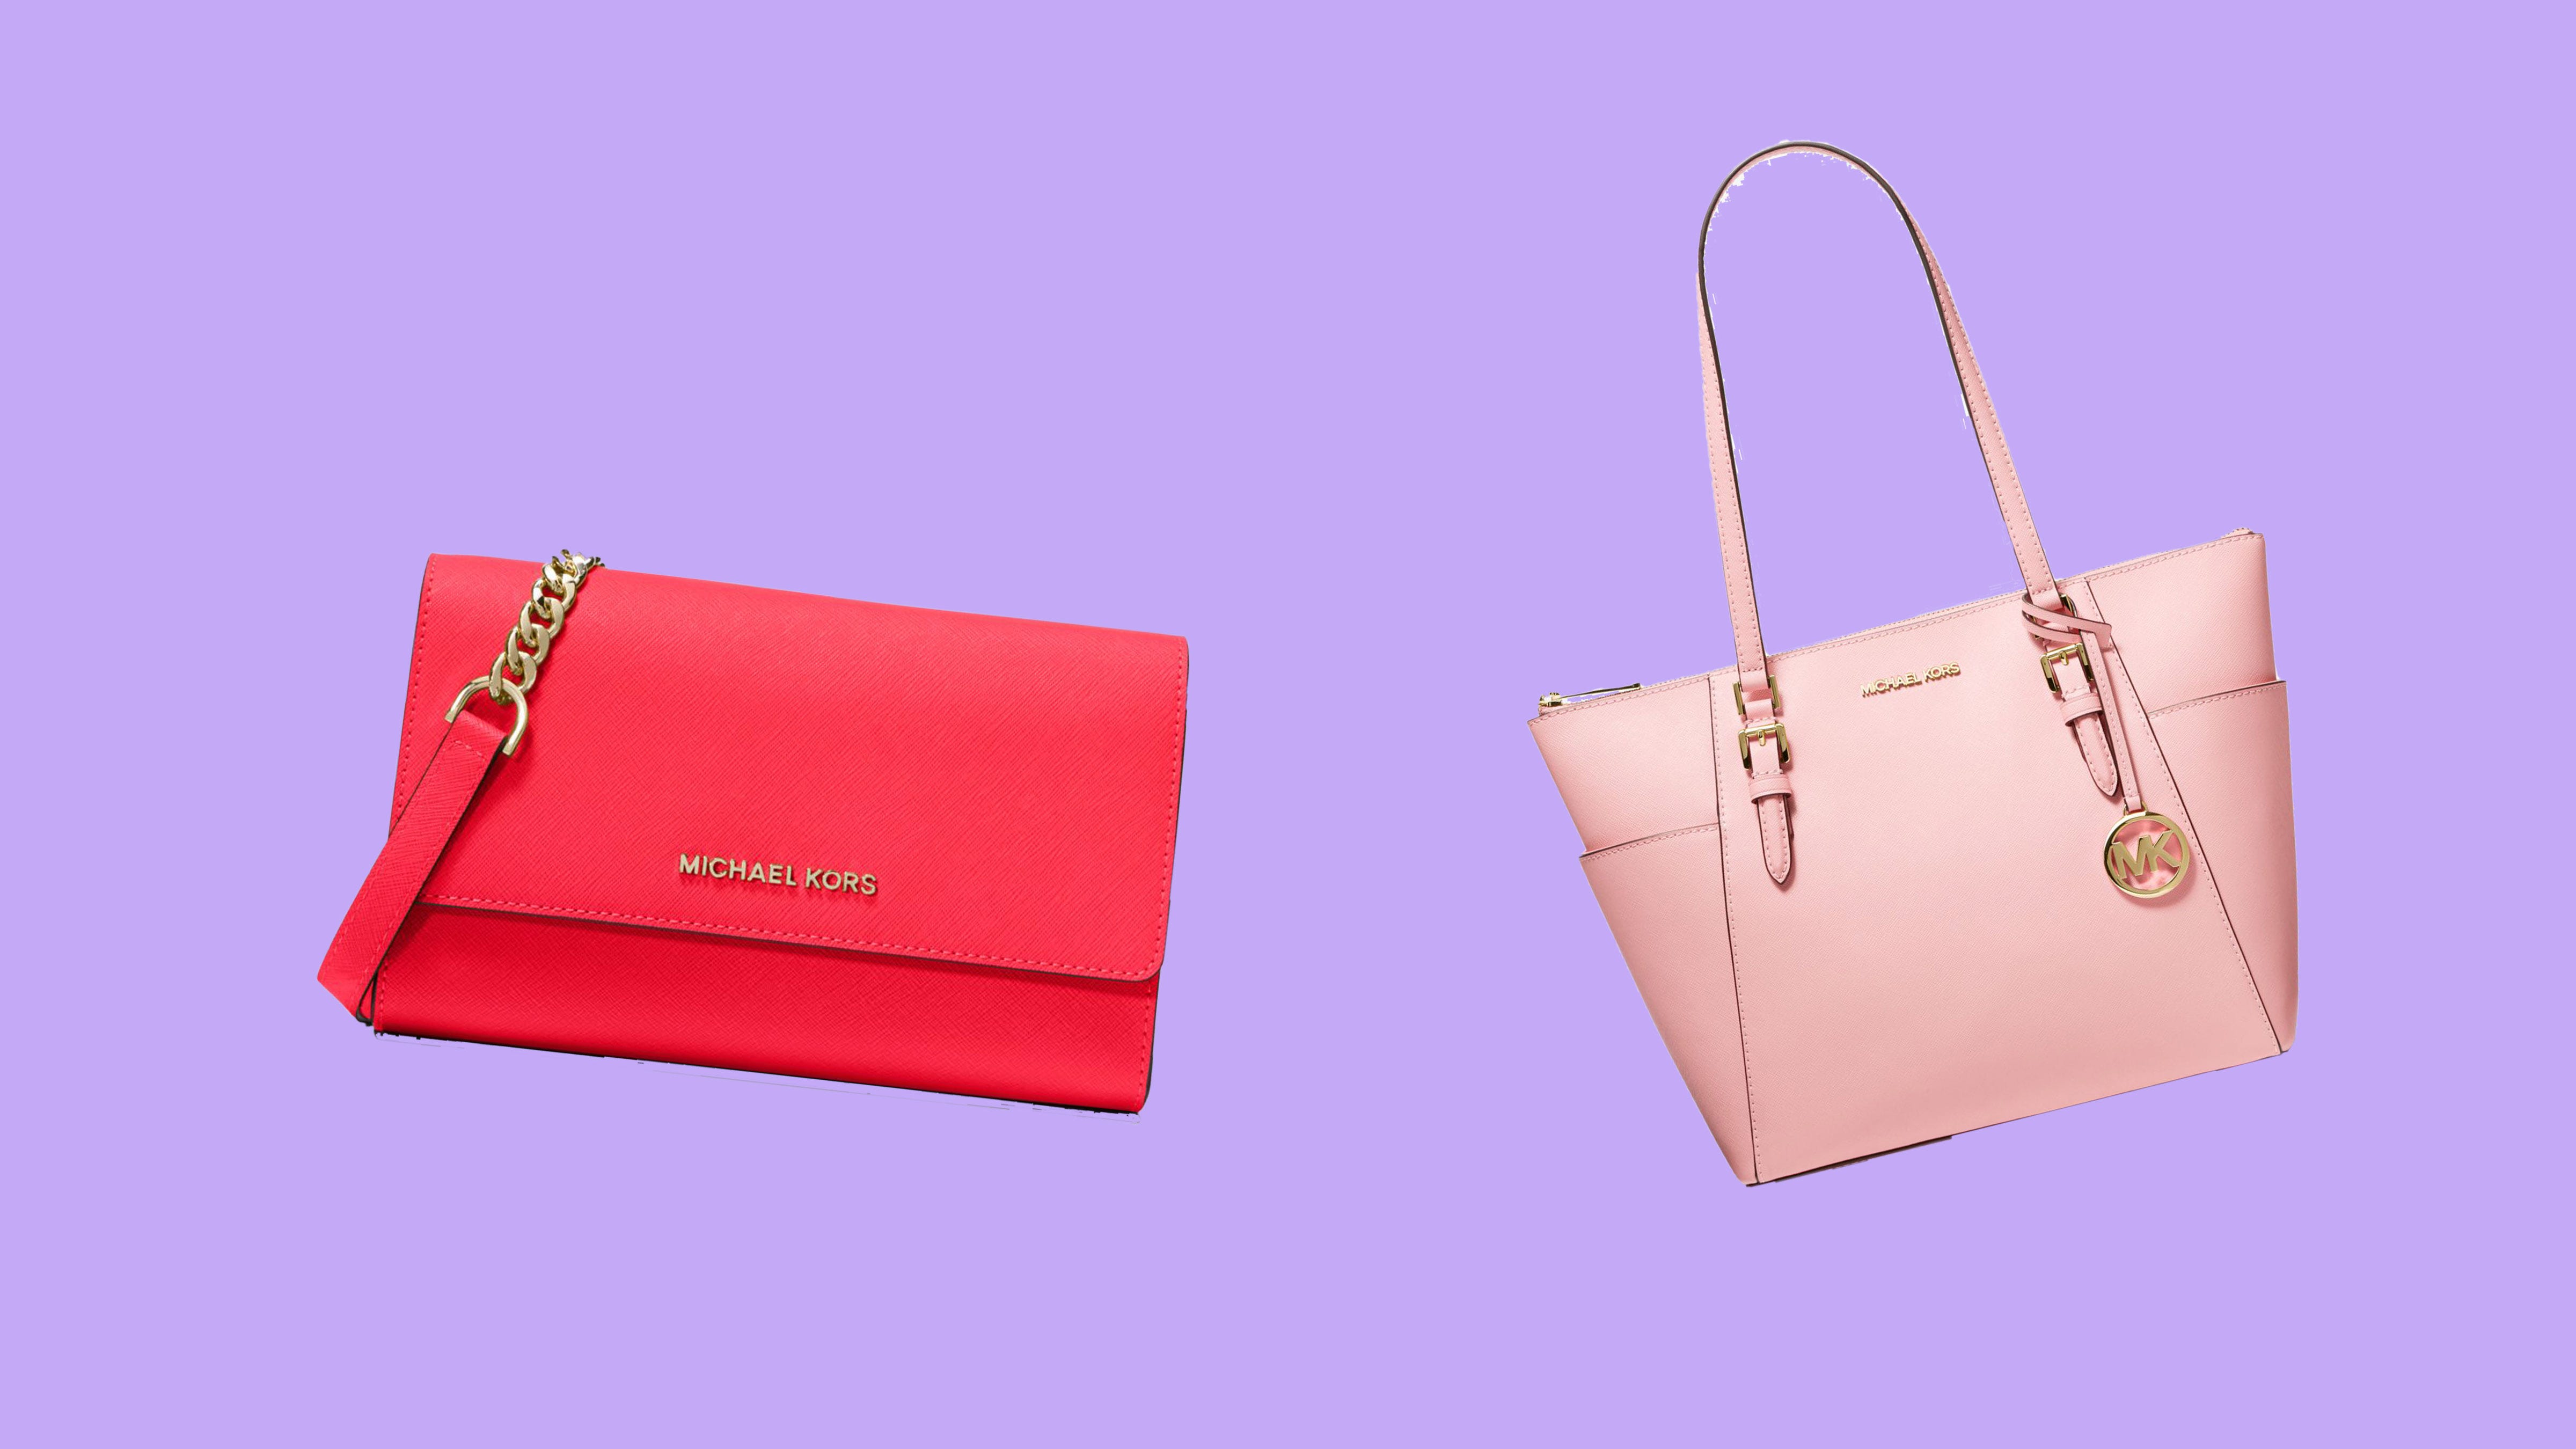 Michael Kors purse: Get up to 60% off 